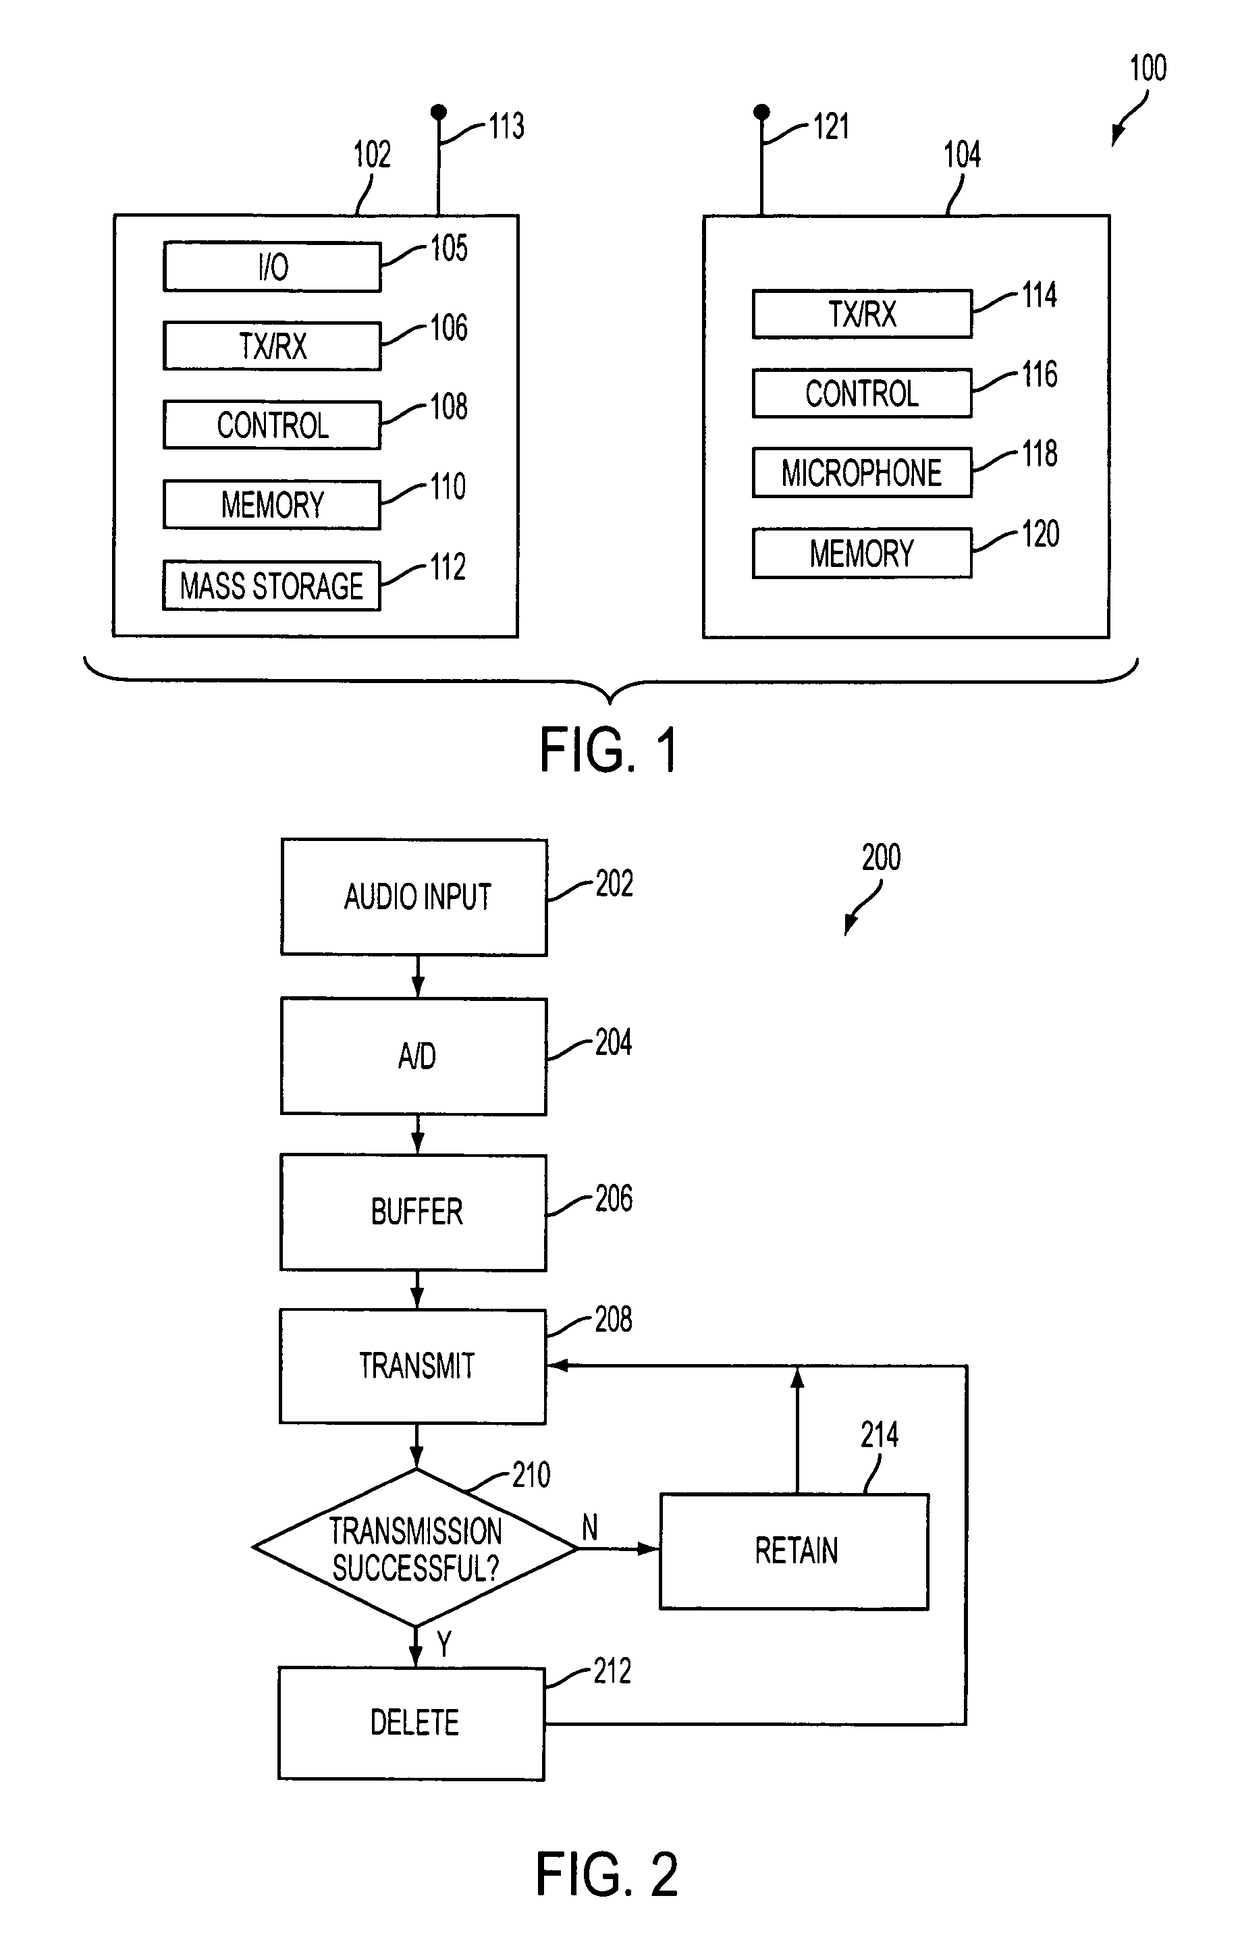 Range-sensitive wireless microphone with out-of-range recording feature